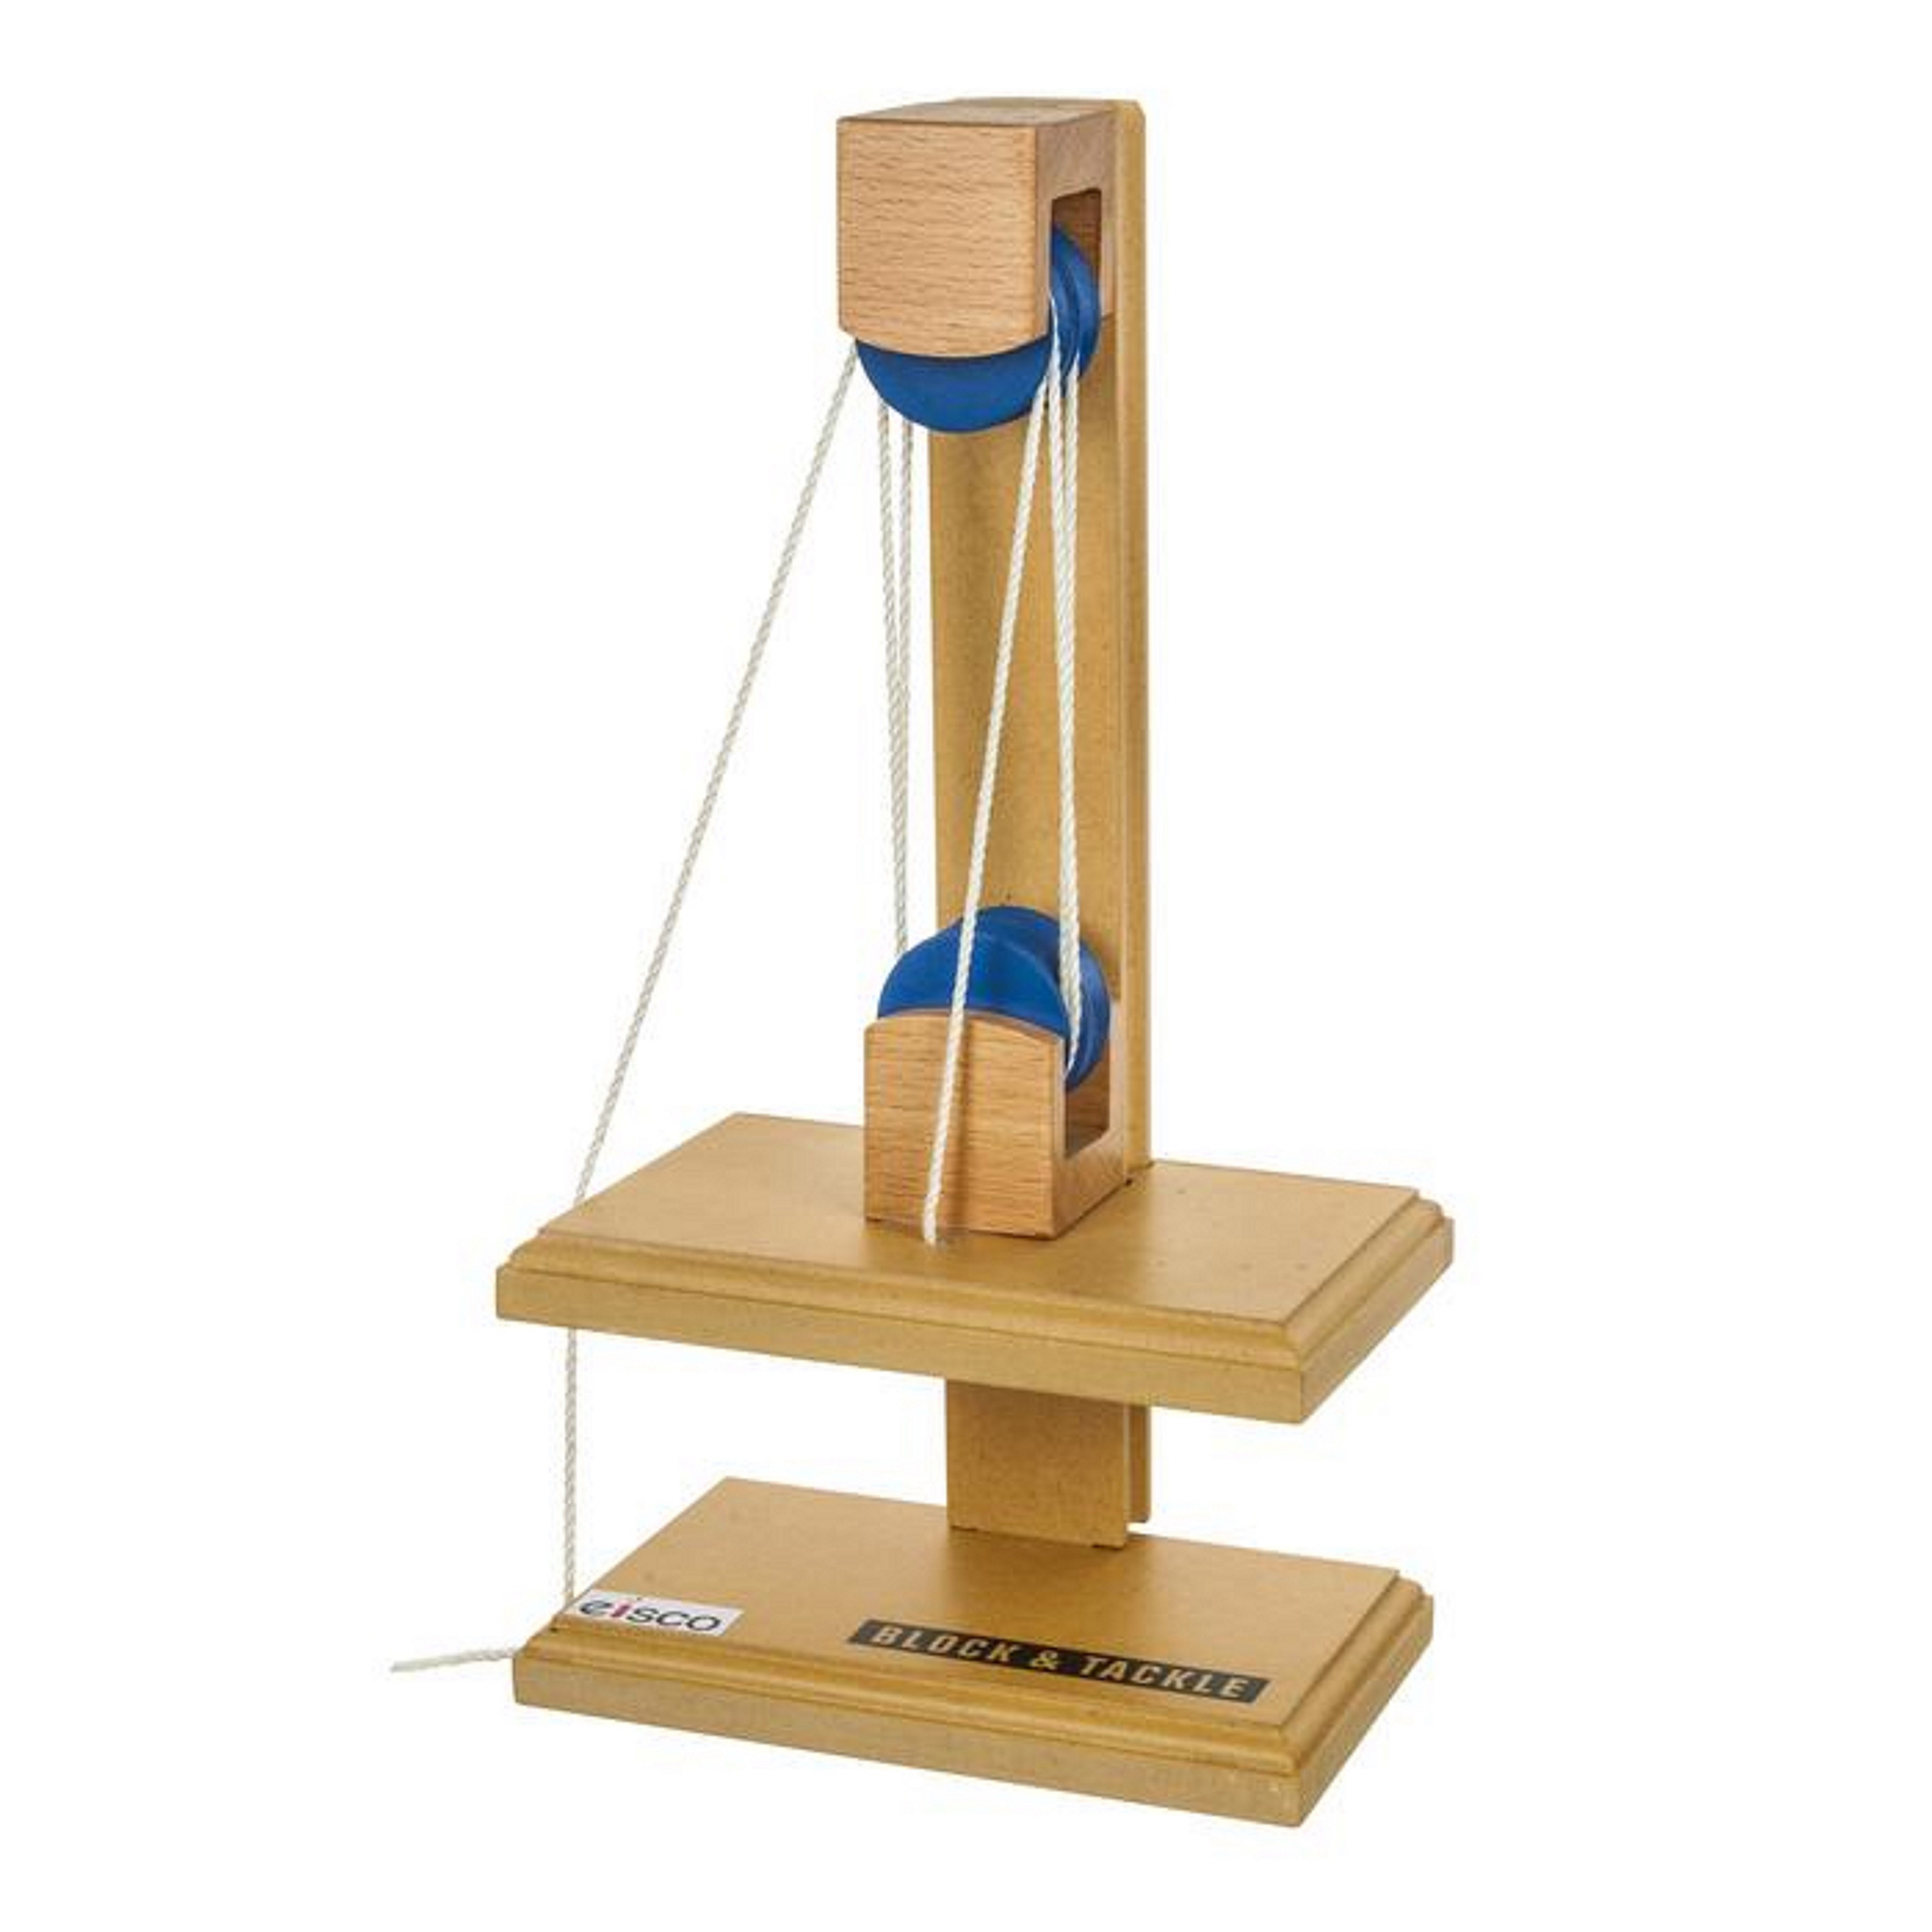 Haba Block and Tackle Pulley Toy